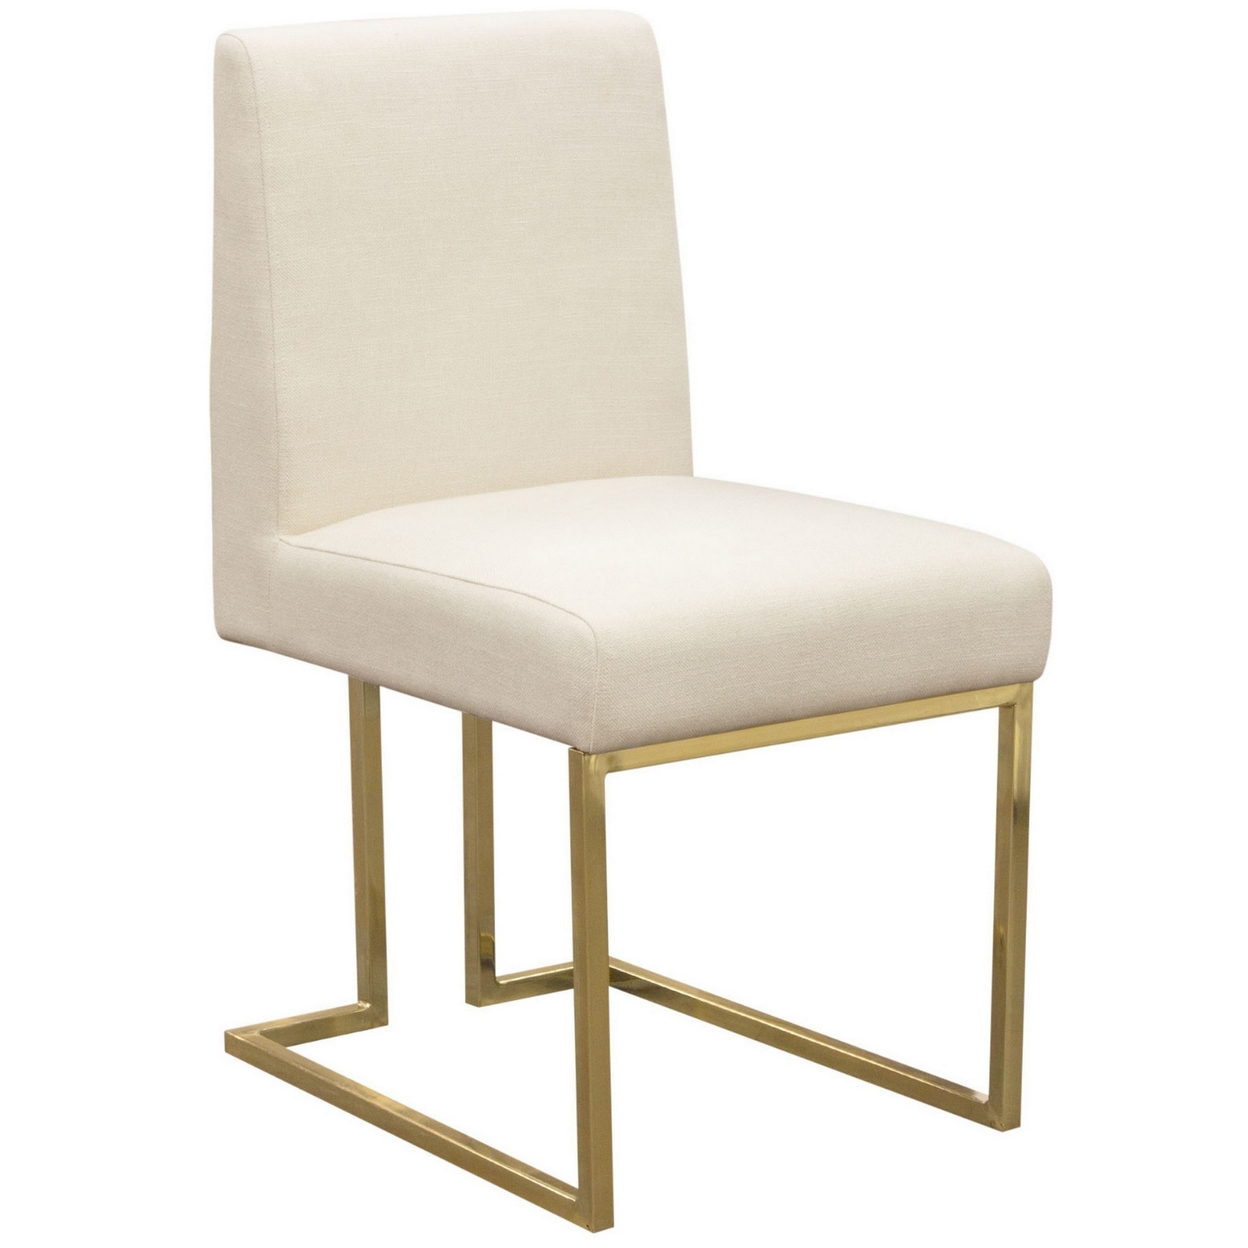 22 Inch Set Of 2 Dining Chairs, Gold Base, Cushioned Seats Cream Upholstery- Saltoro Sherpi